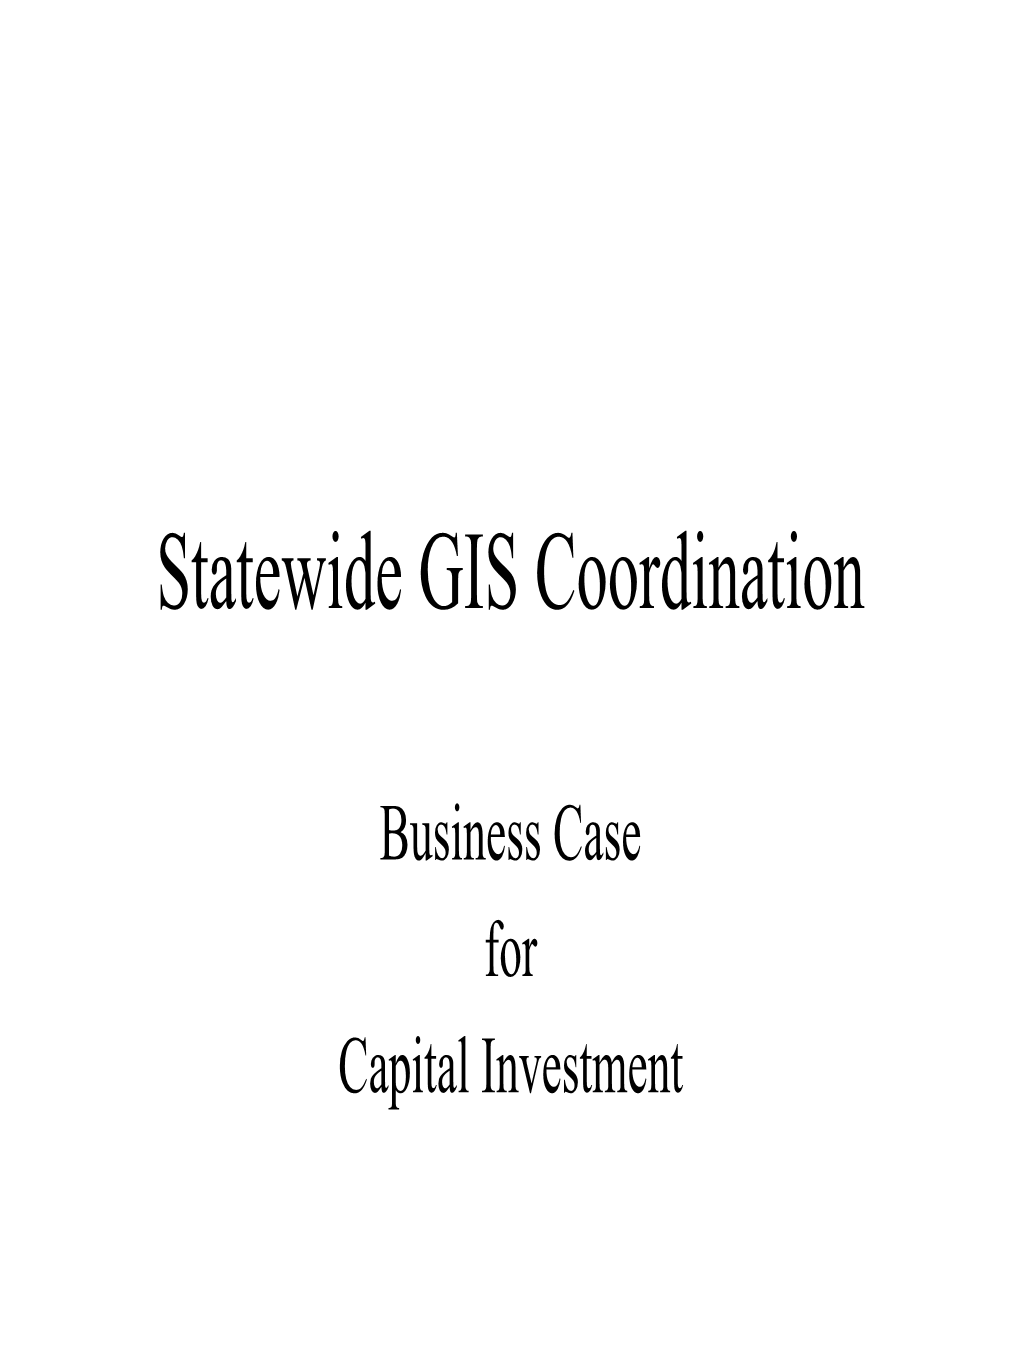 Statewide GIS Coordination